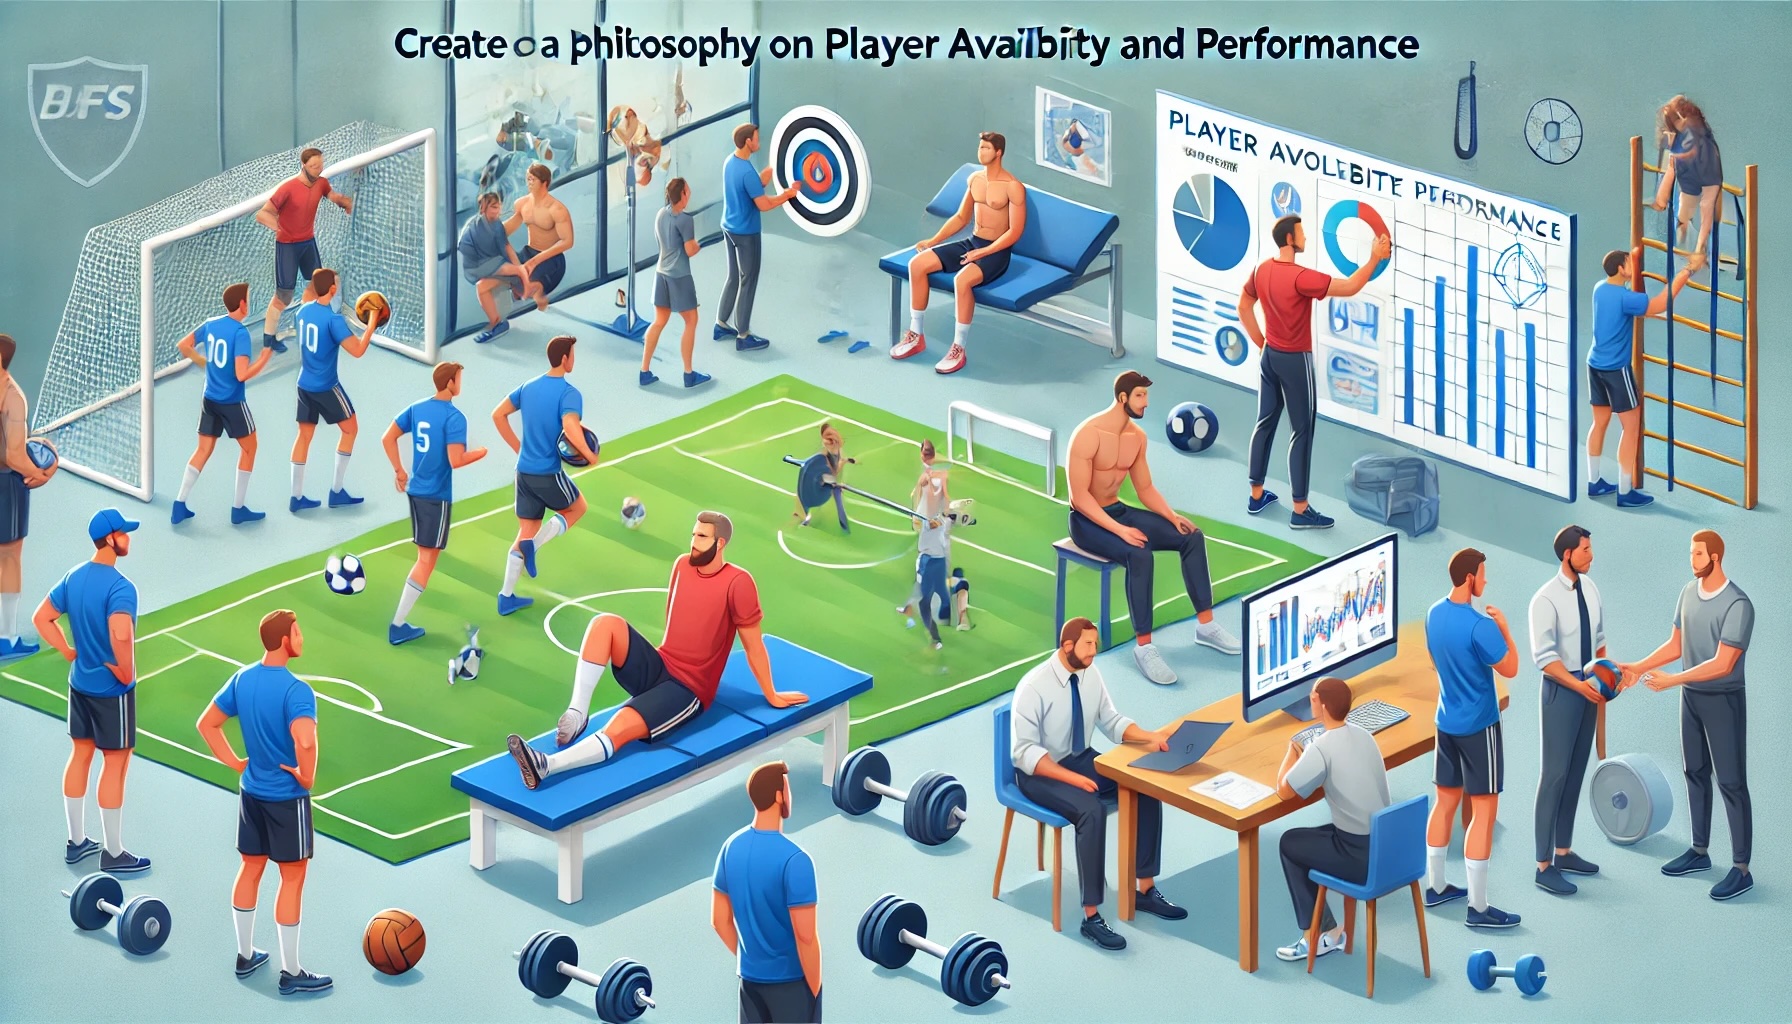 Player Availability and Performance Considerations